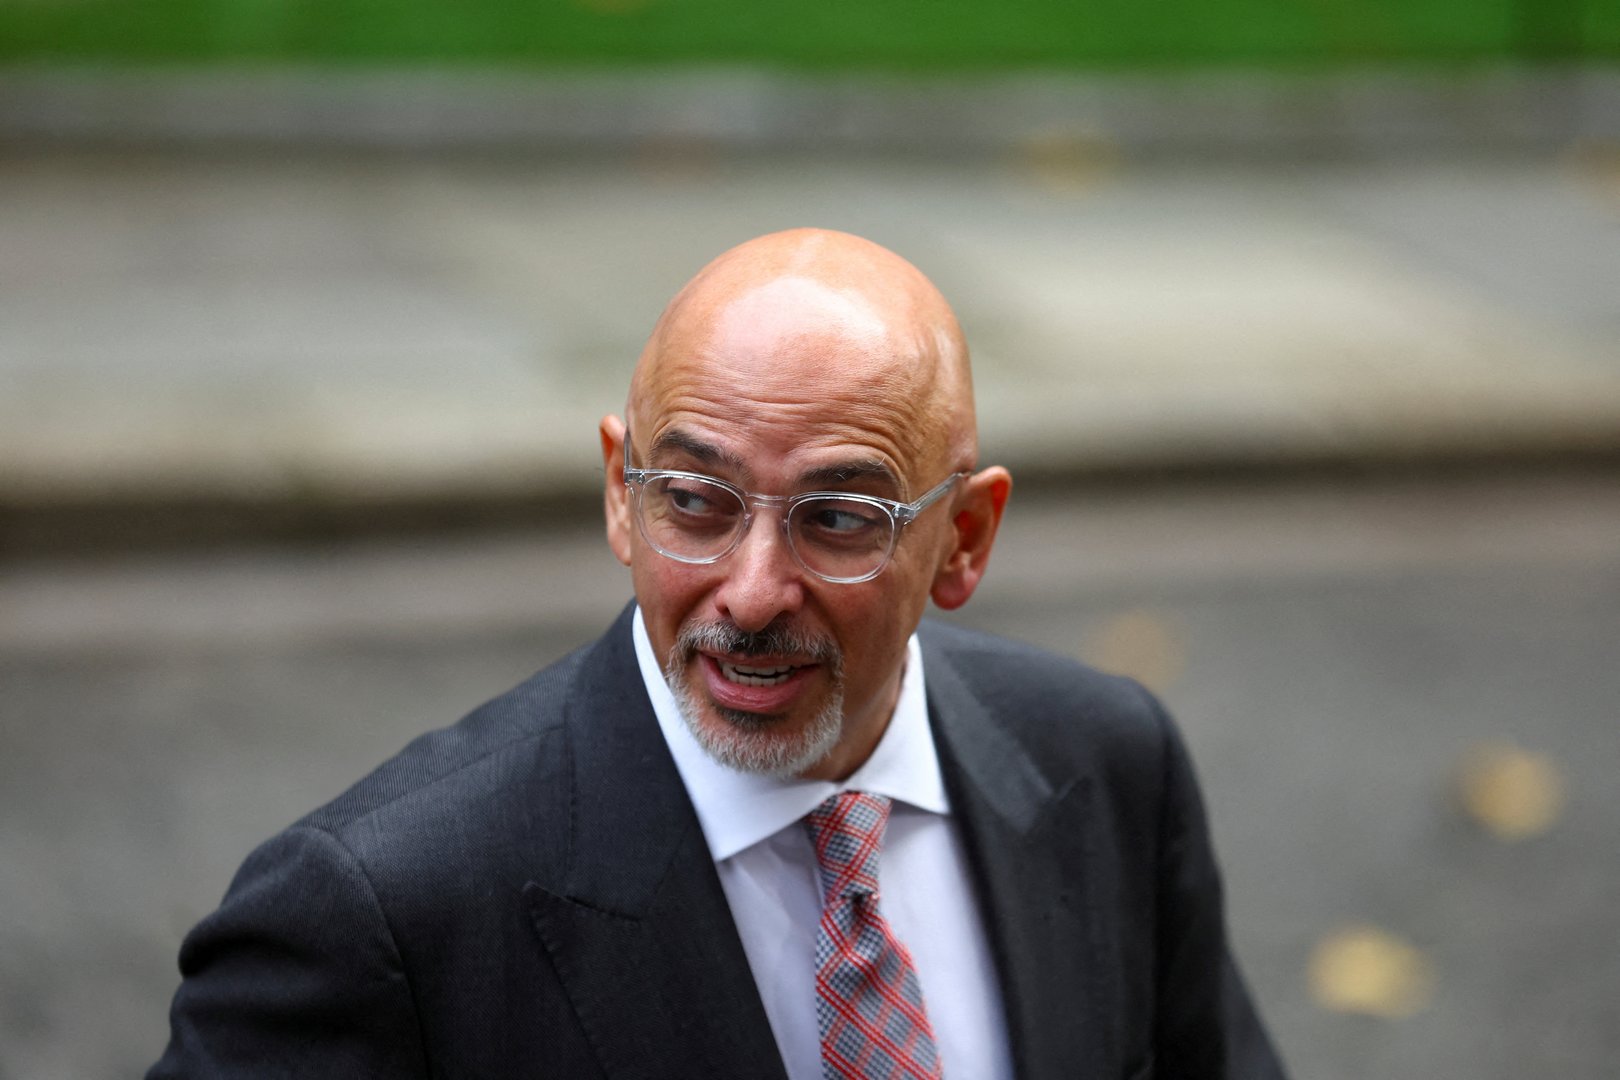 image Sunak fires party chairman Zahawi after breach of ministerial code (Update 2)